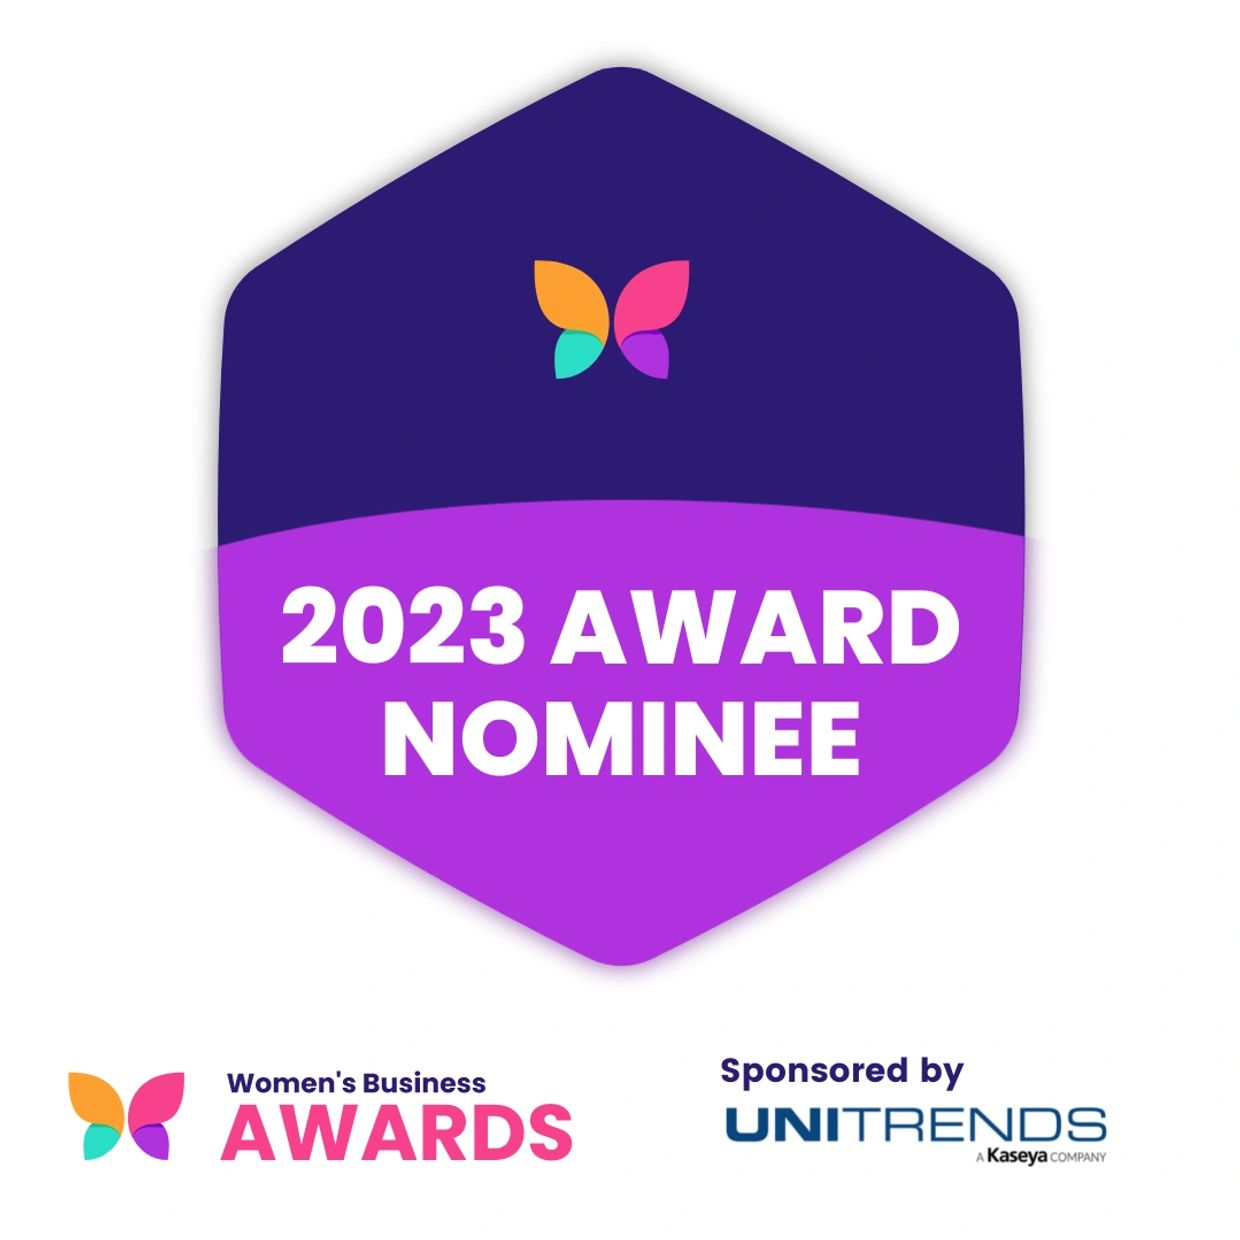 2023 AWARD NOMINEE BADGE from the Women's Business Awards Club, sponsored by Unitrends. Kaseya compa